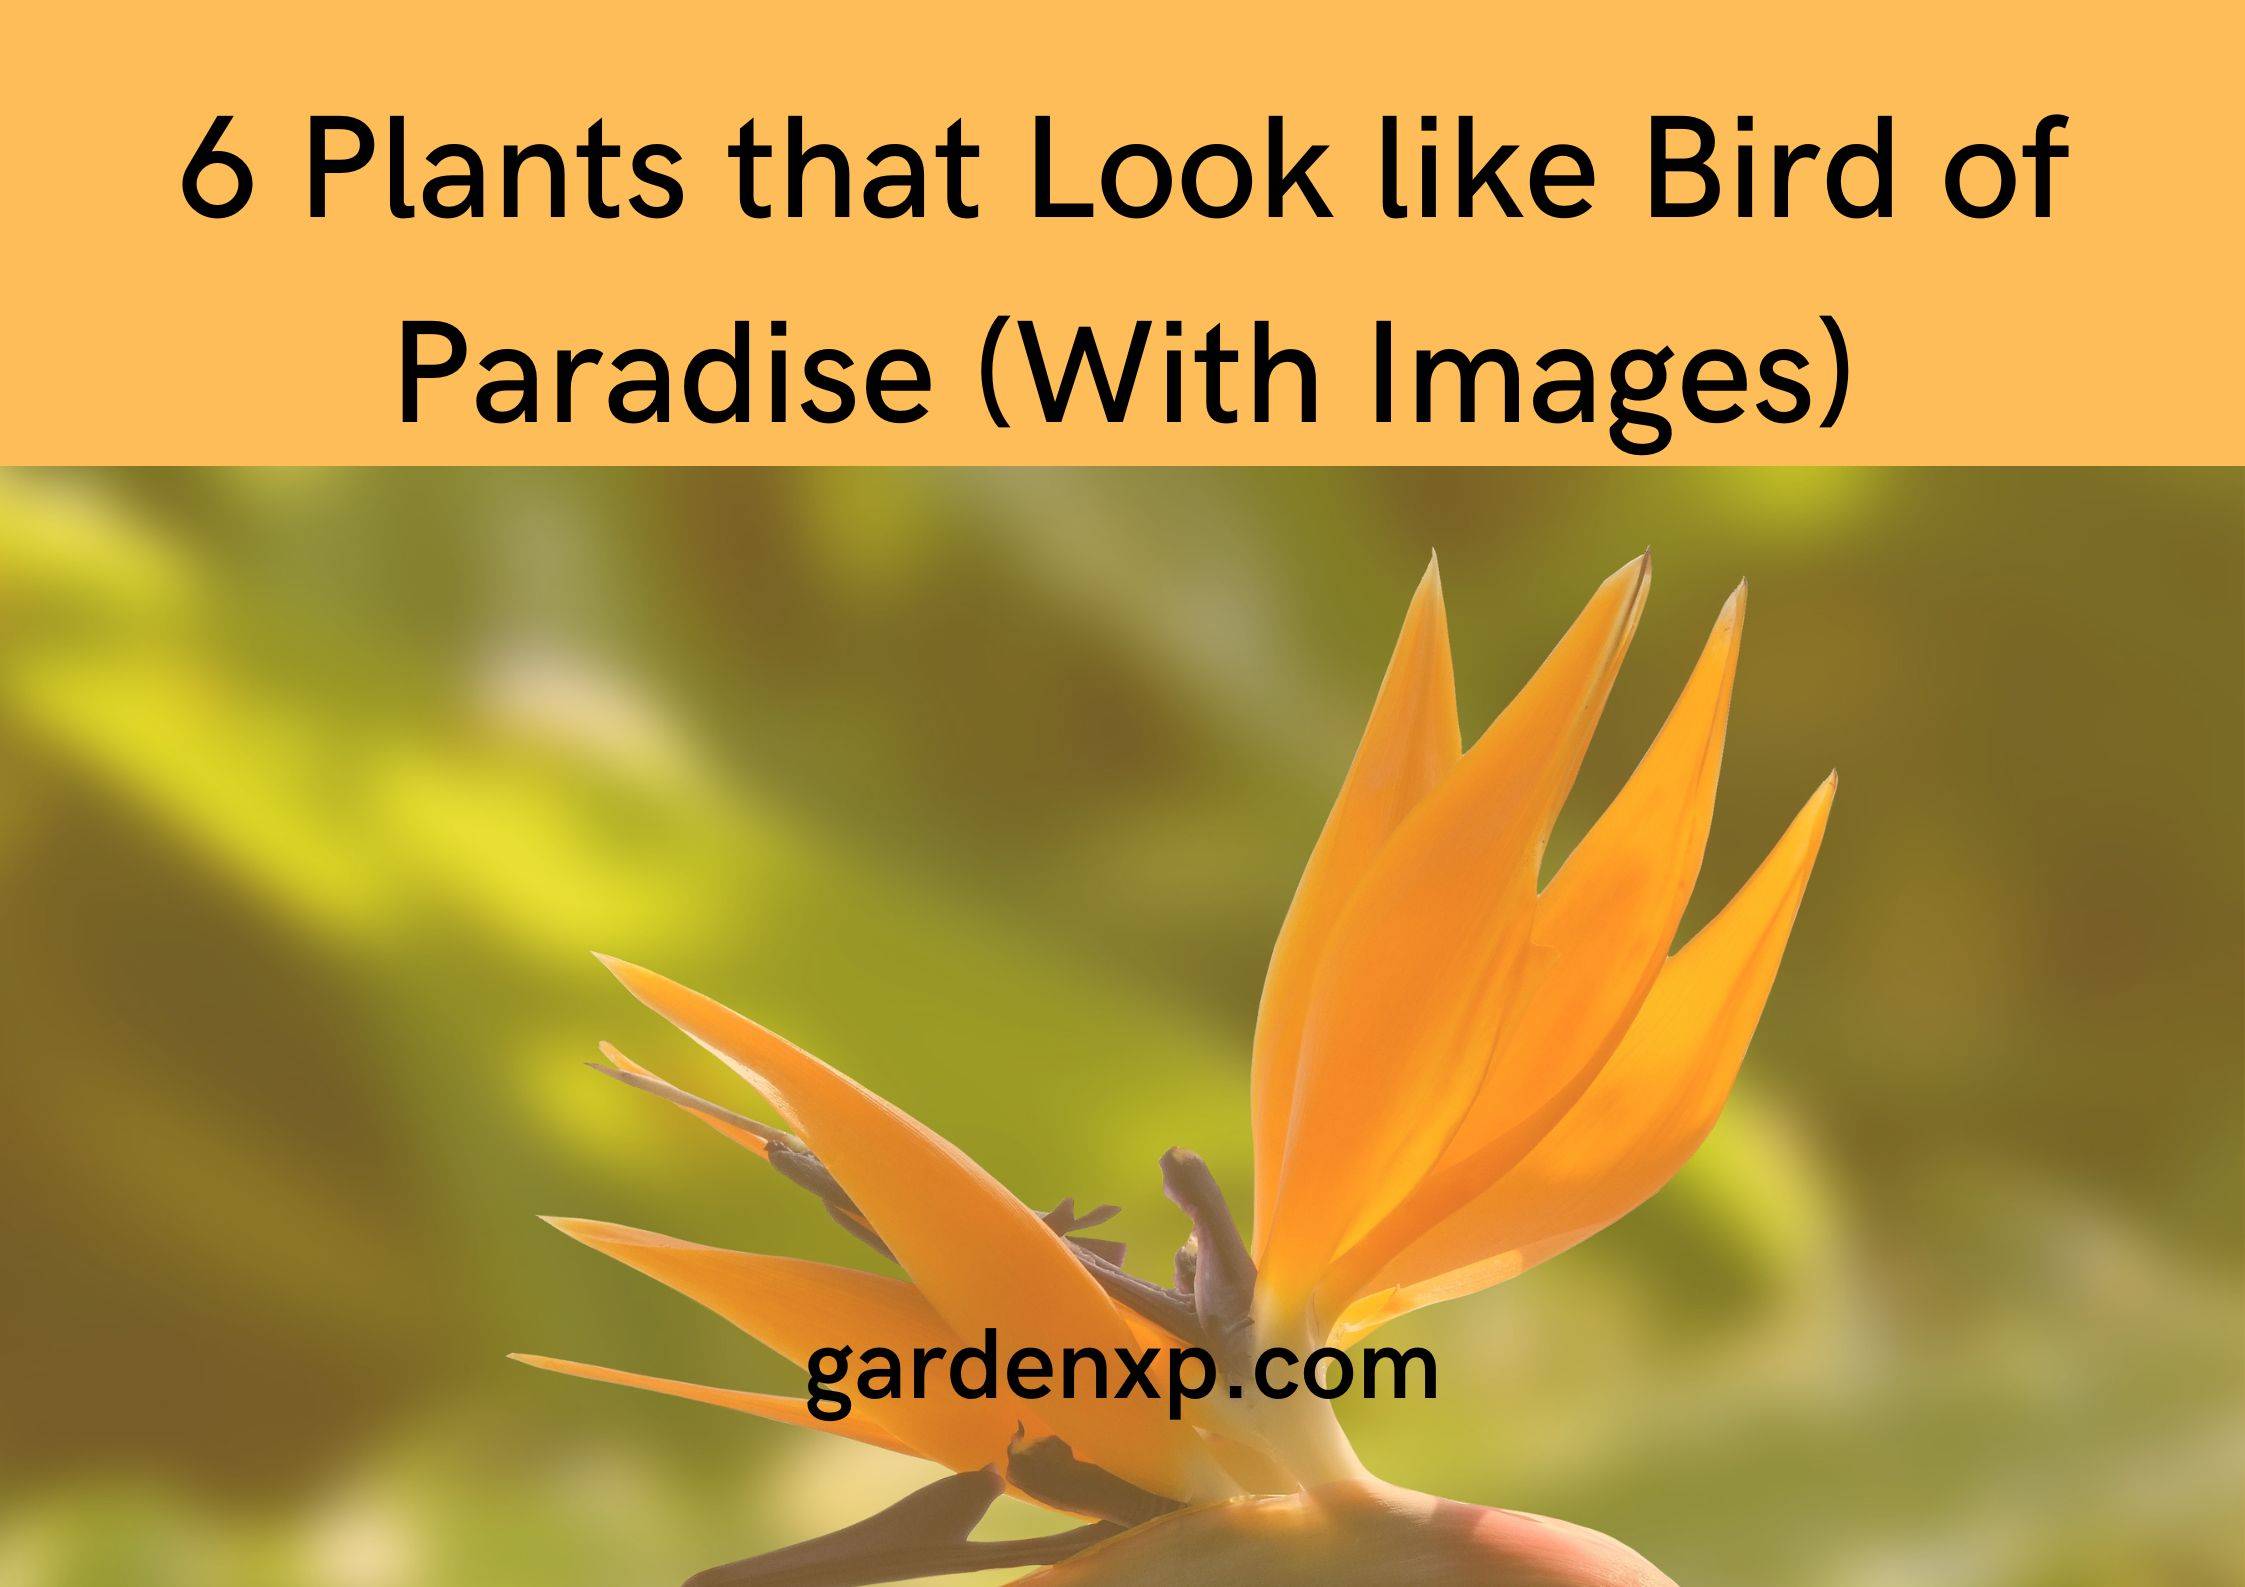 6 Plants that Look like Bird of Paradise (With Images)